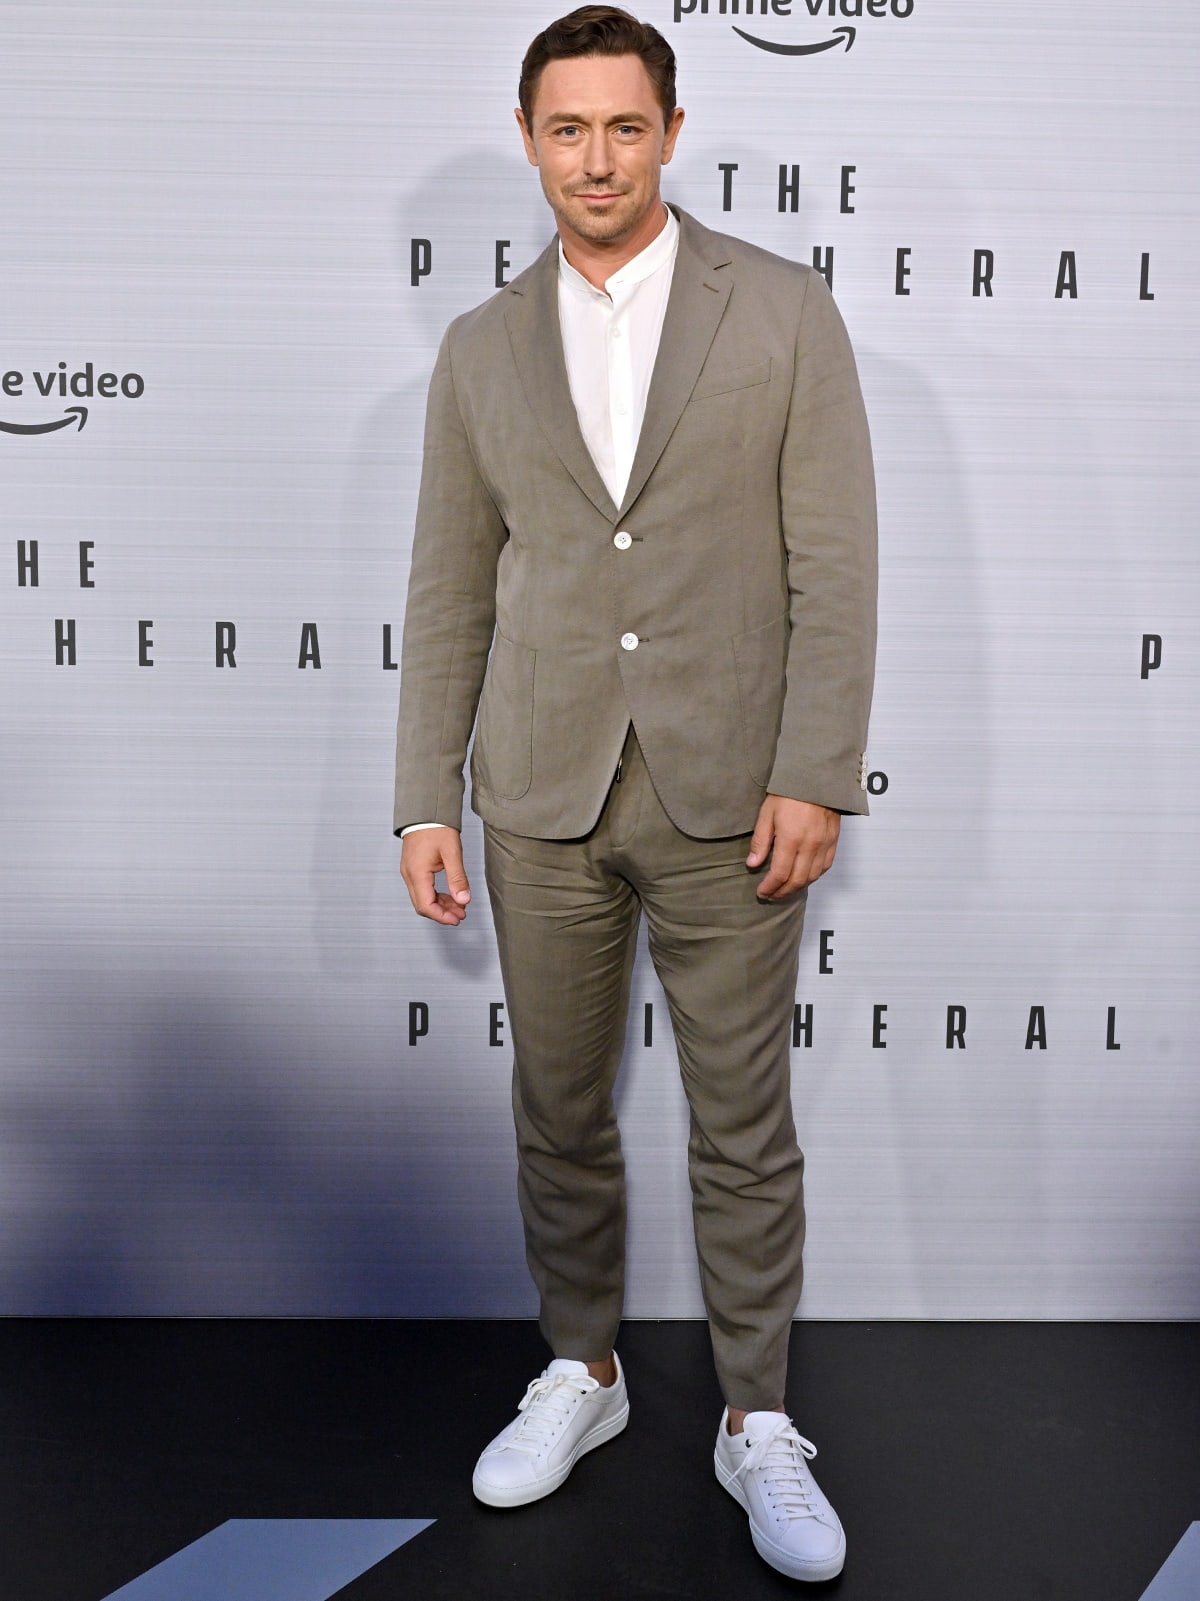 JJ Feild at the Los Angeles premiere of The Peripheral